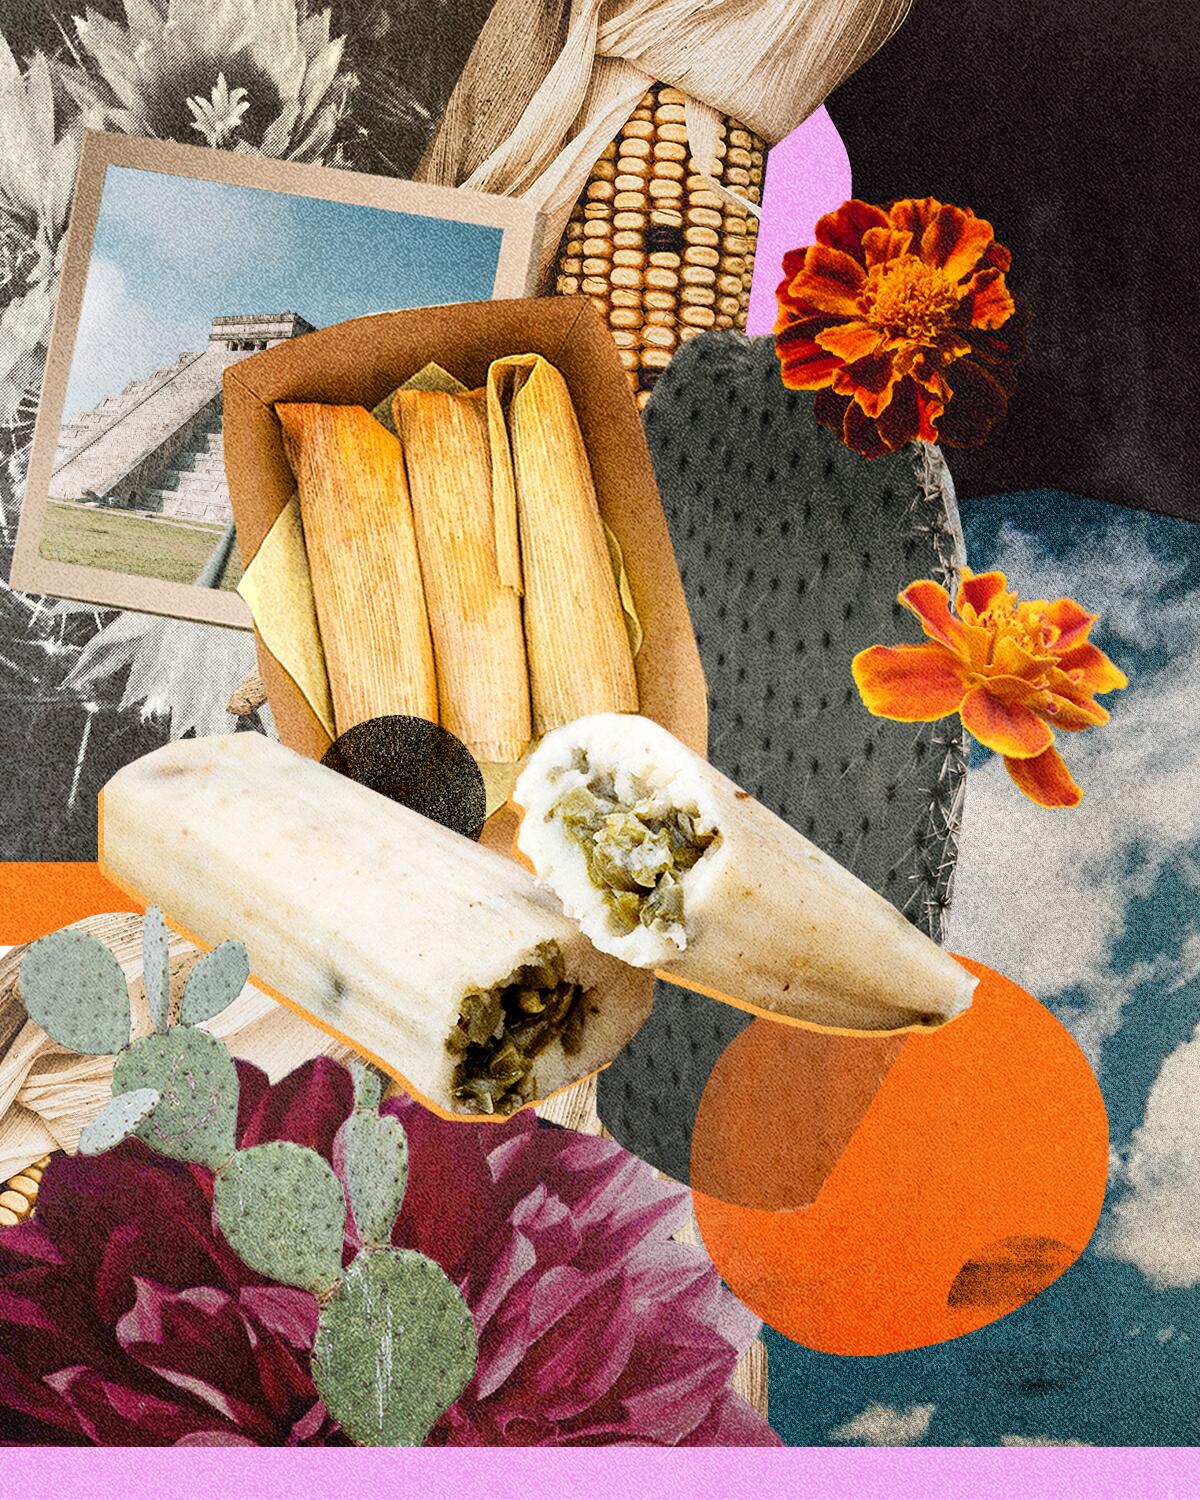 From Mesoamerica to modern day, tamales have persisted as a dish for all seasons